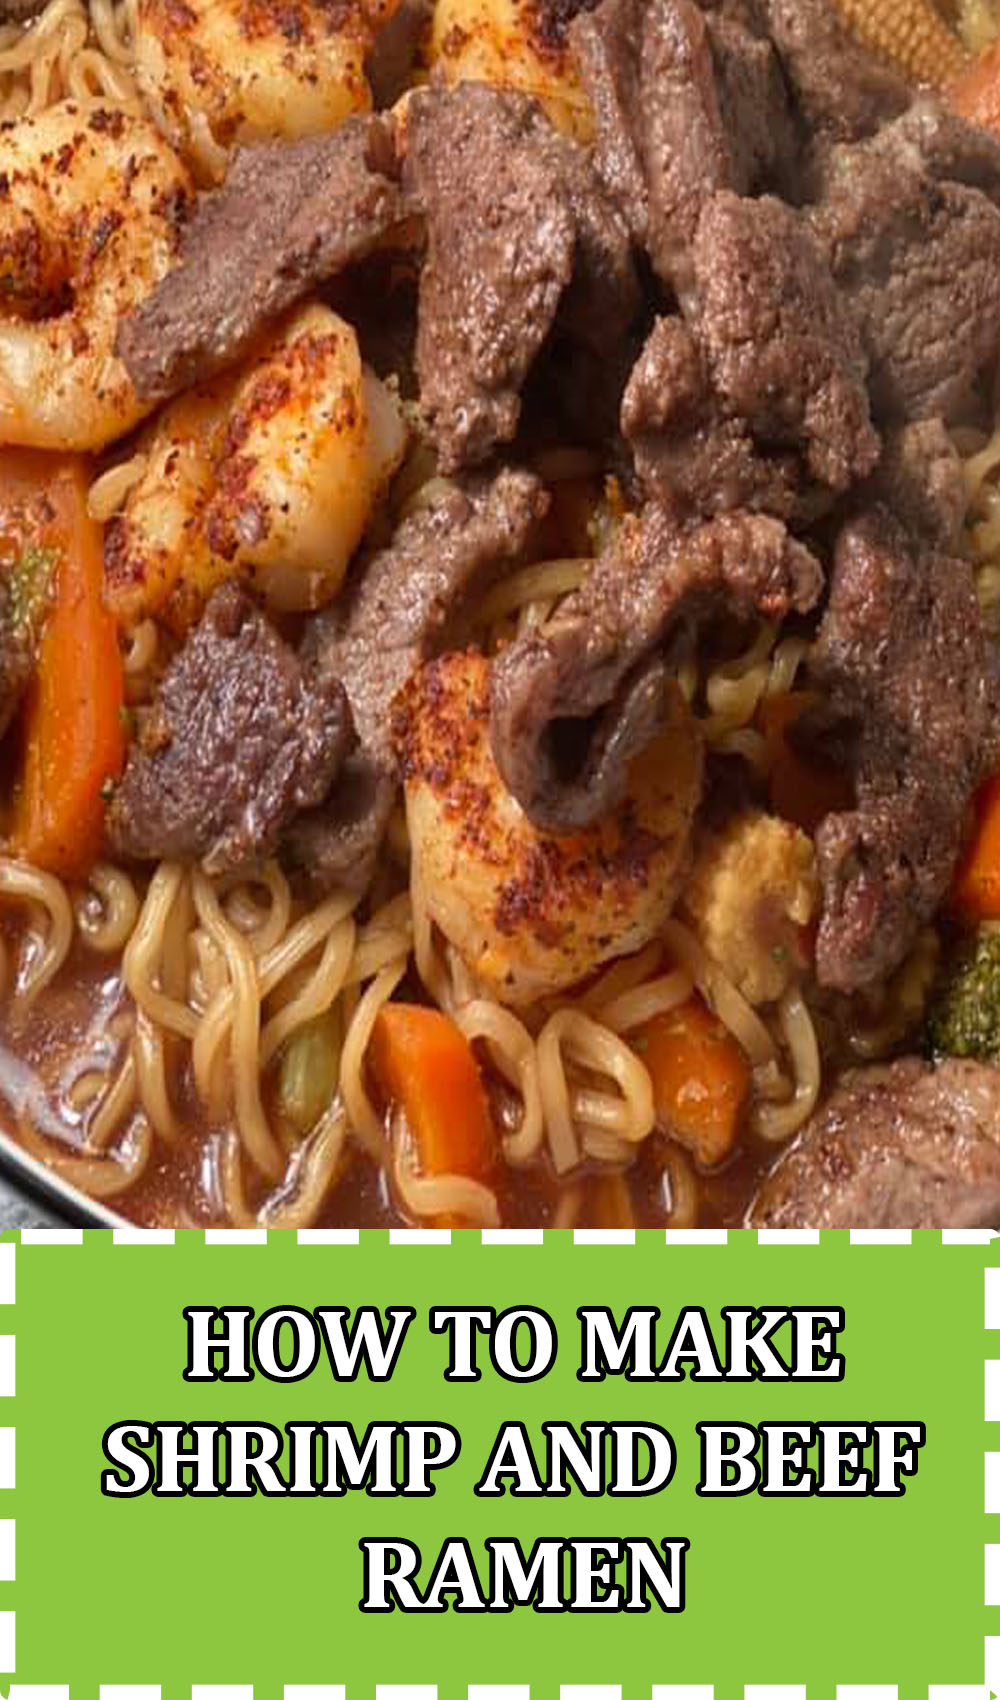 HOW TO MAKE SHRIMP AND BEEF RAMEN